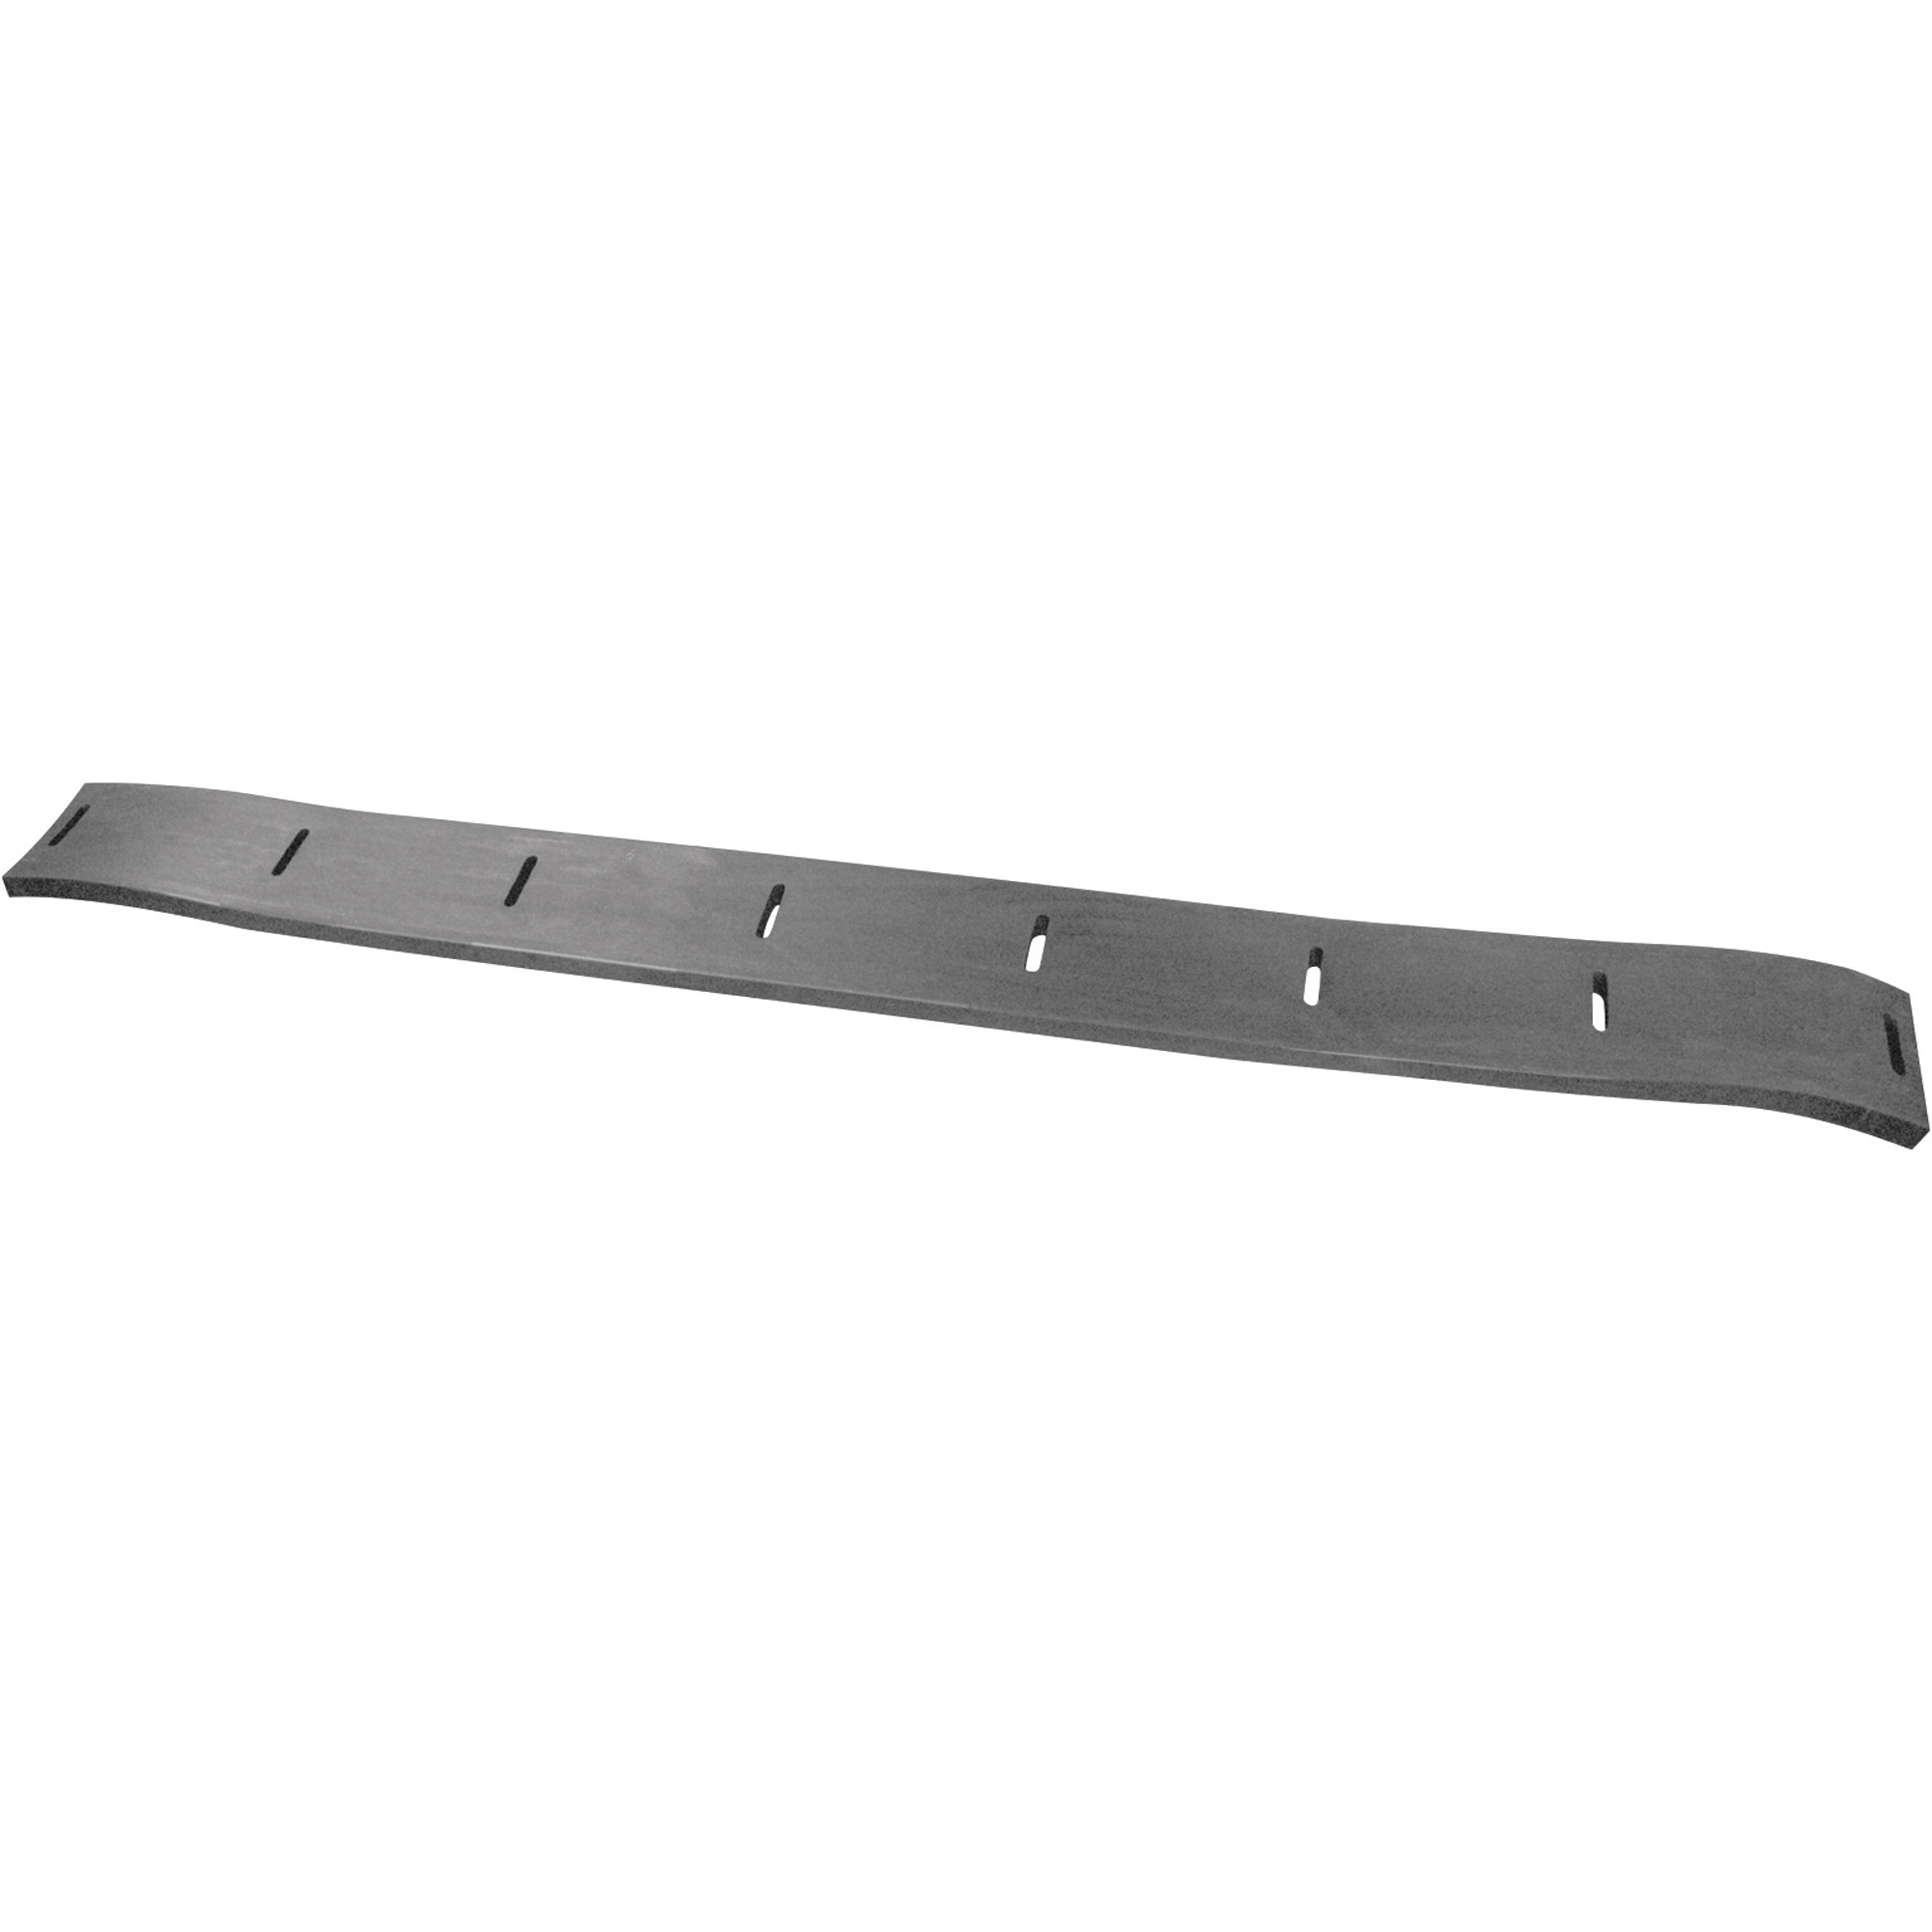 Meyer Rubber Snow Plow Cutting Edge — 8ft.L, Model 08190 -  Meyer Products